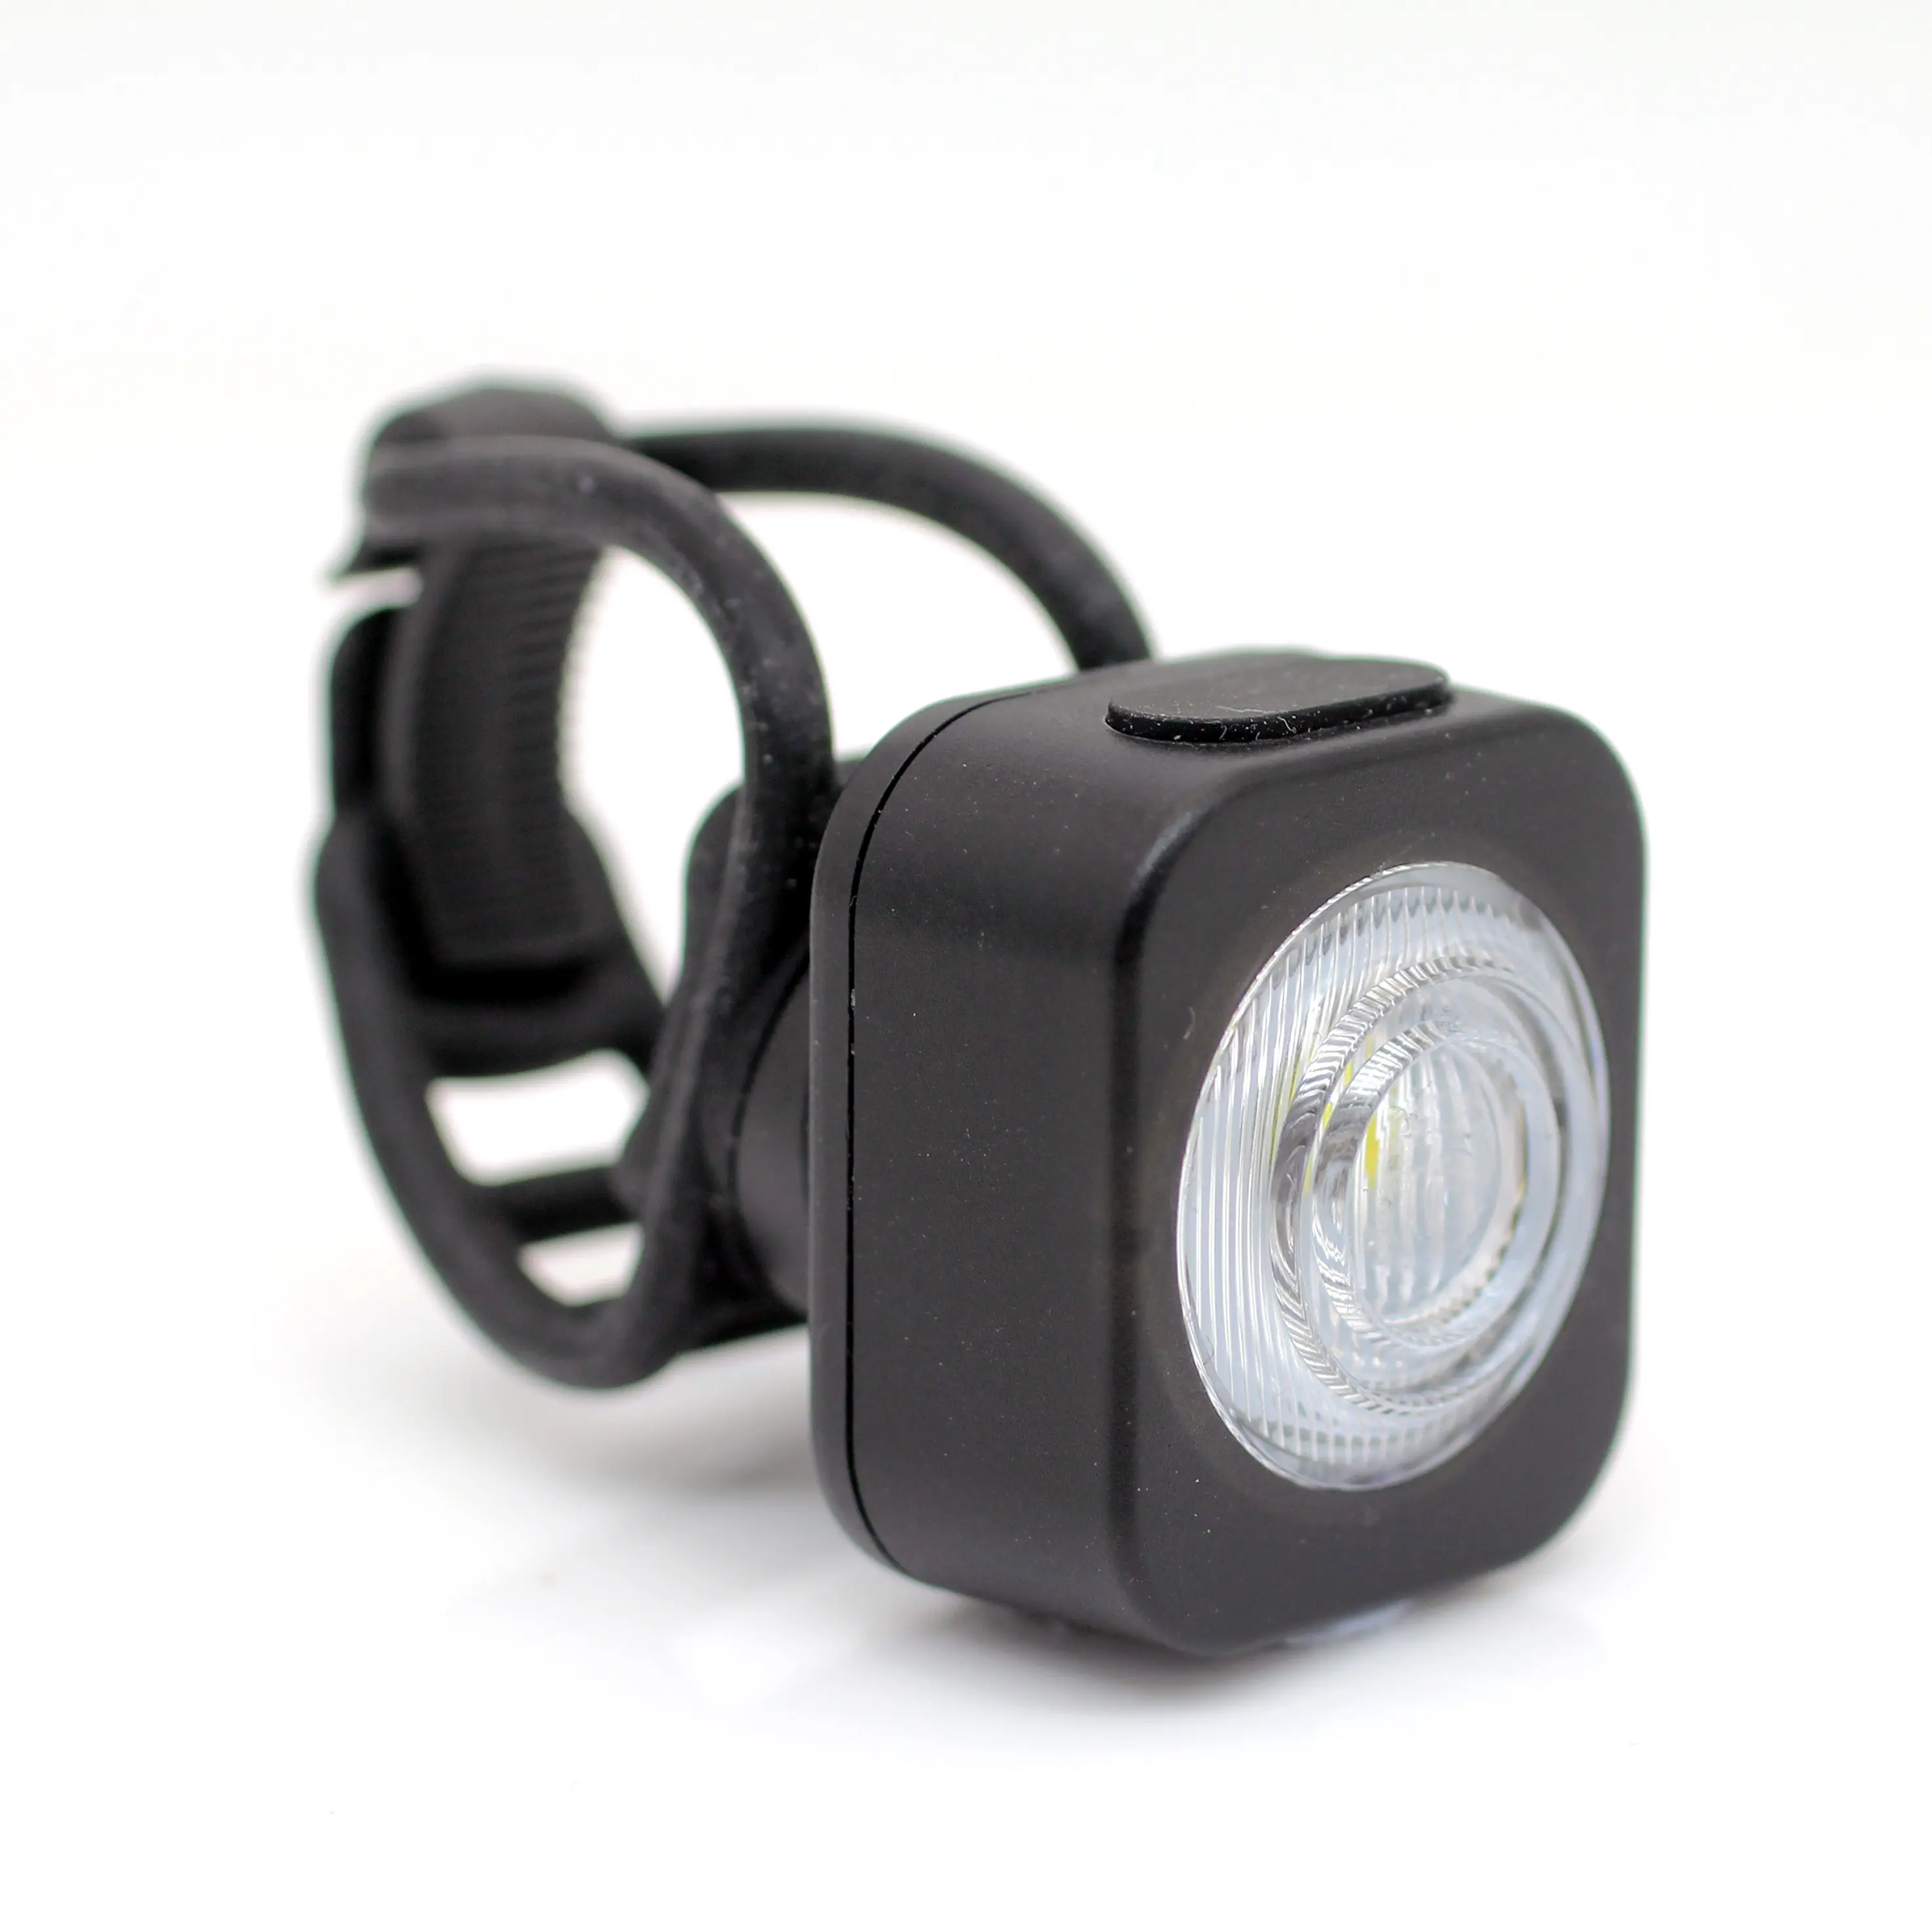 Top Fashion Small Headlight Rechargeable Led 1000 Lumen Best Bike For Bicycle Light